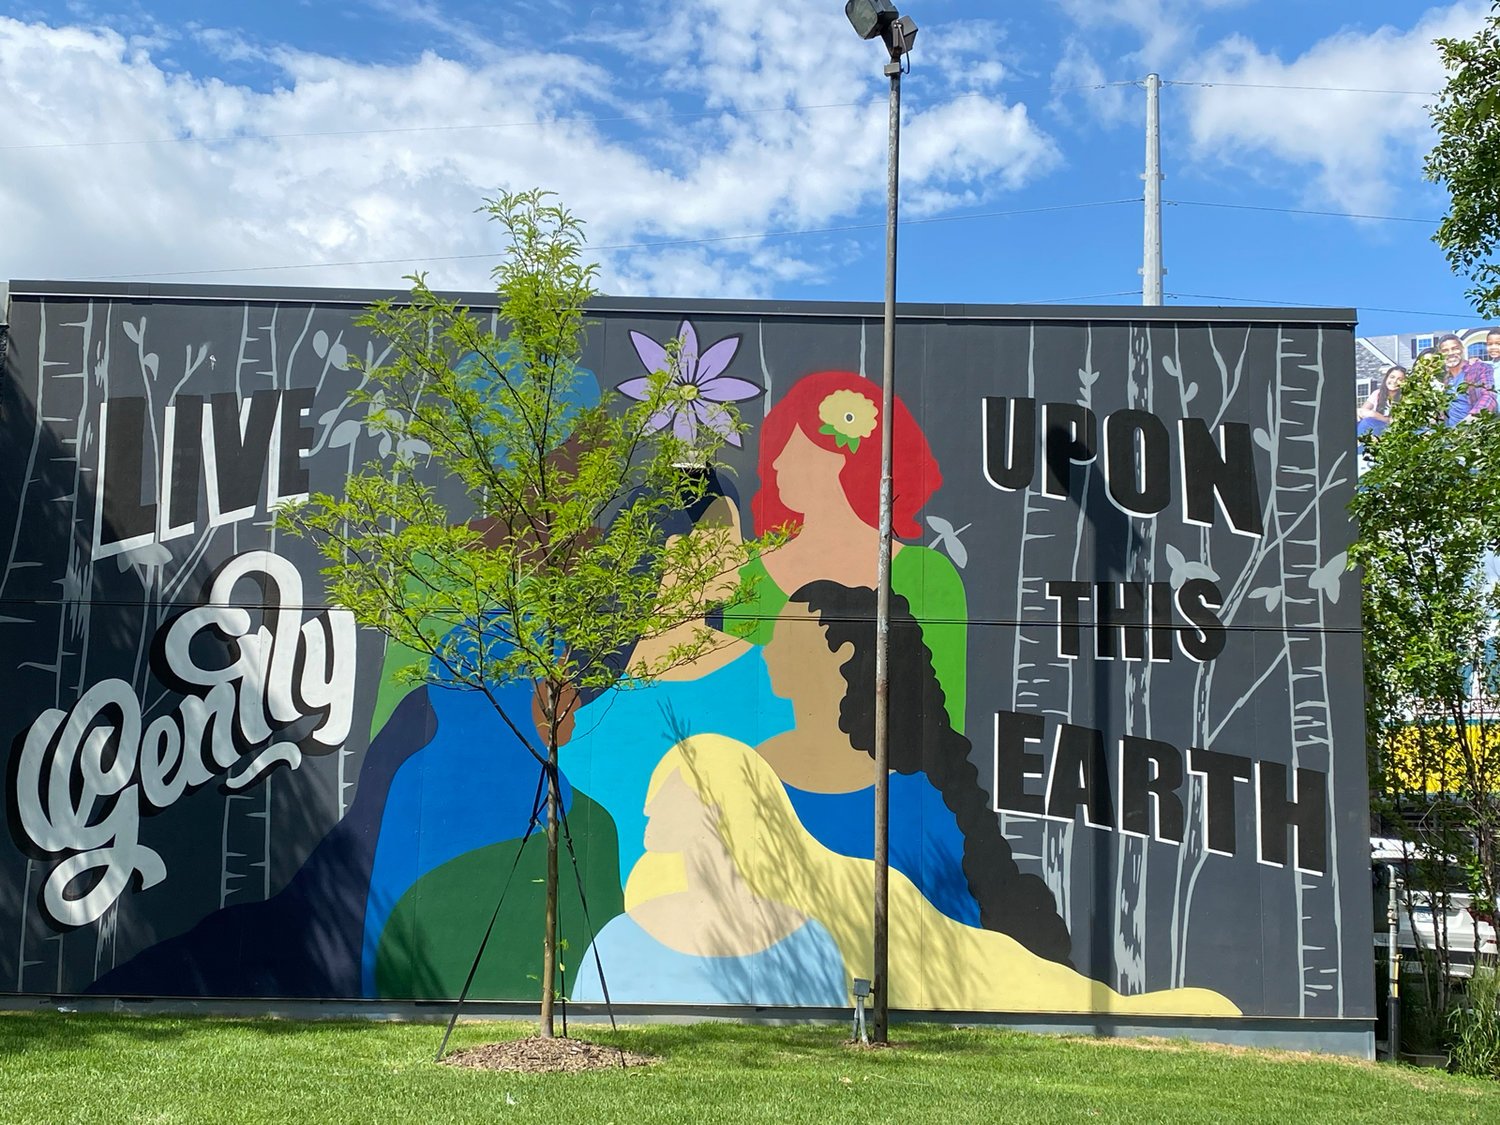 A new mural on The Lift Garage, which was not destroyed along with many others on the block, including the Arby's that was next door.  (Photo by Tesha M. Christensen)